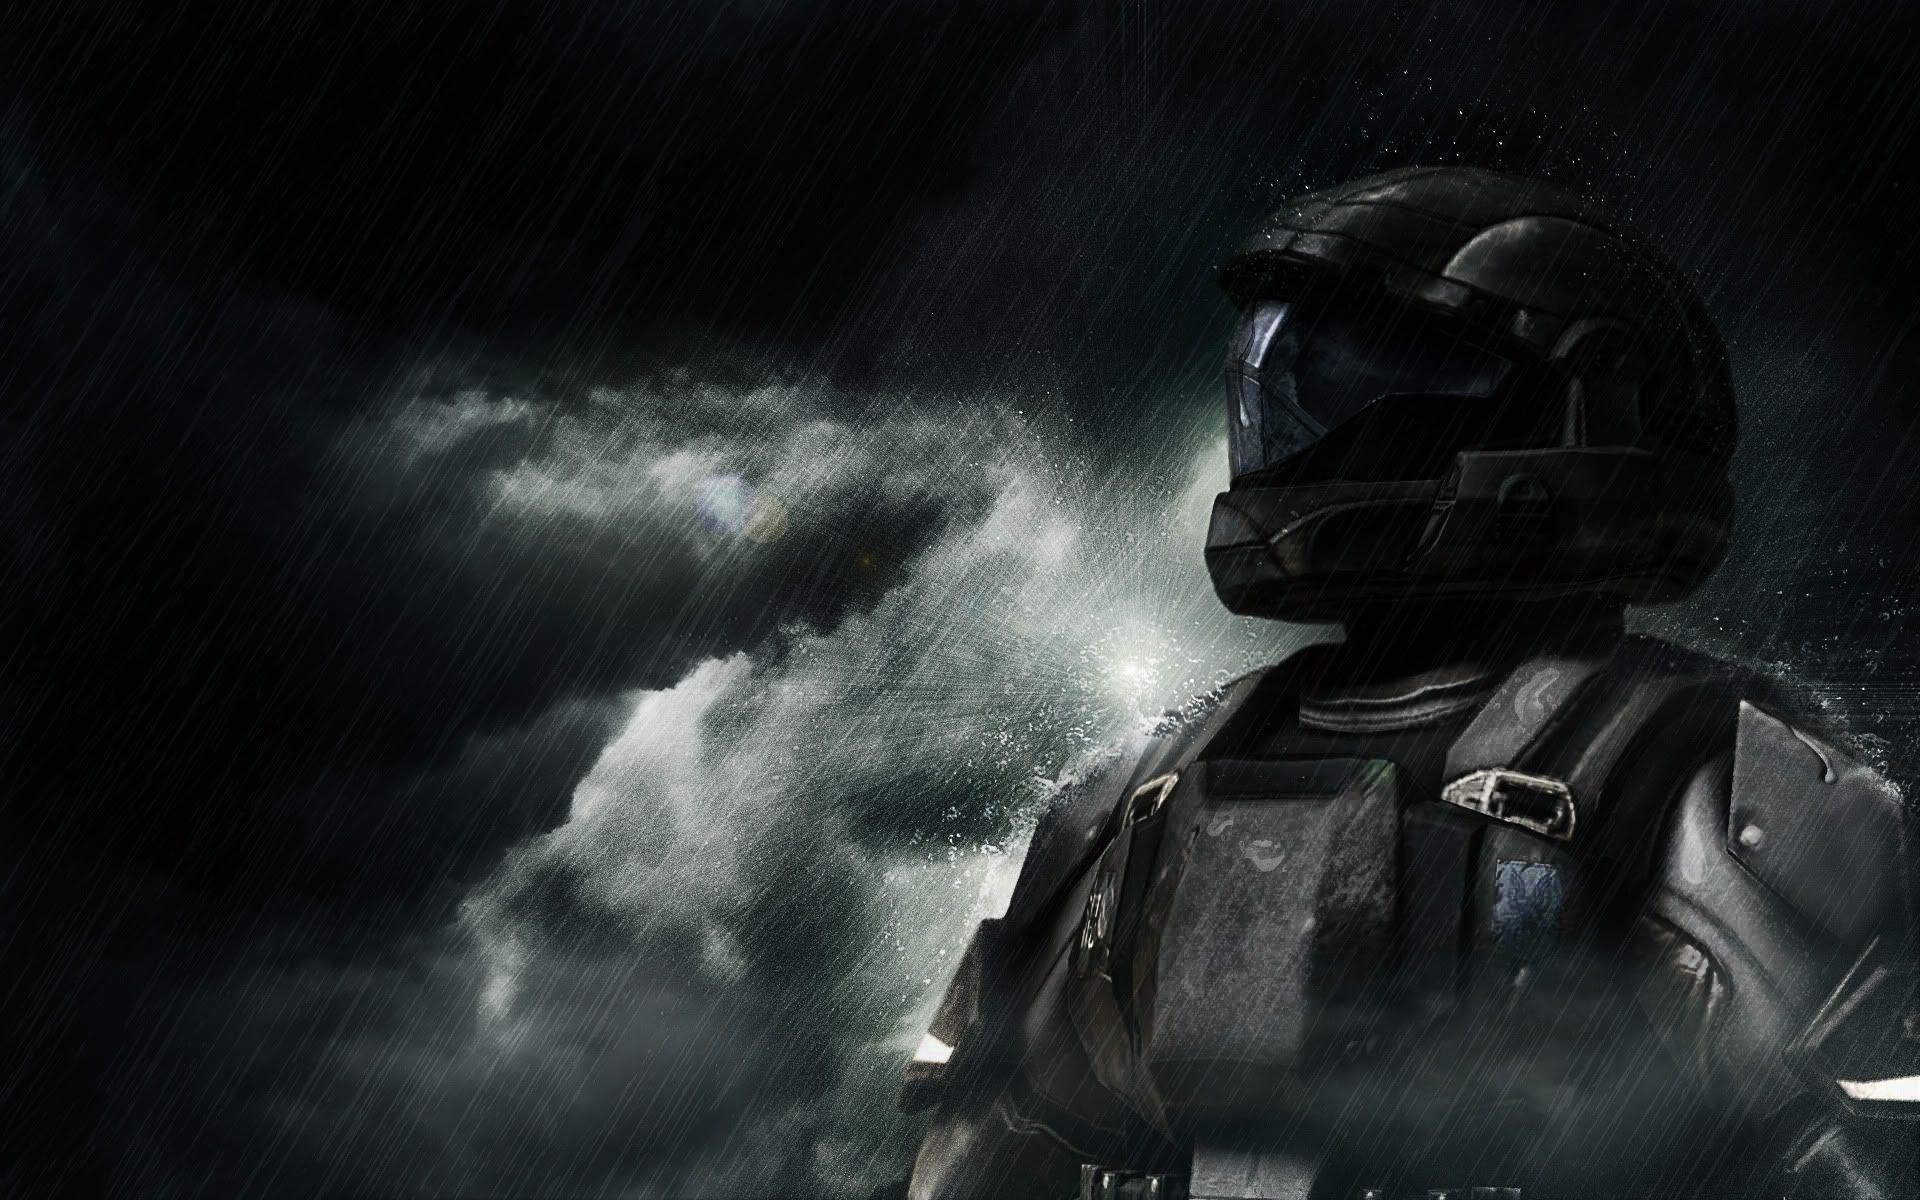 Halo 3 Odst Wallpapers 81 Pictures.